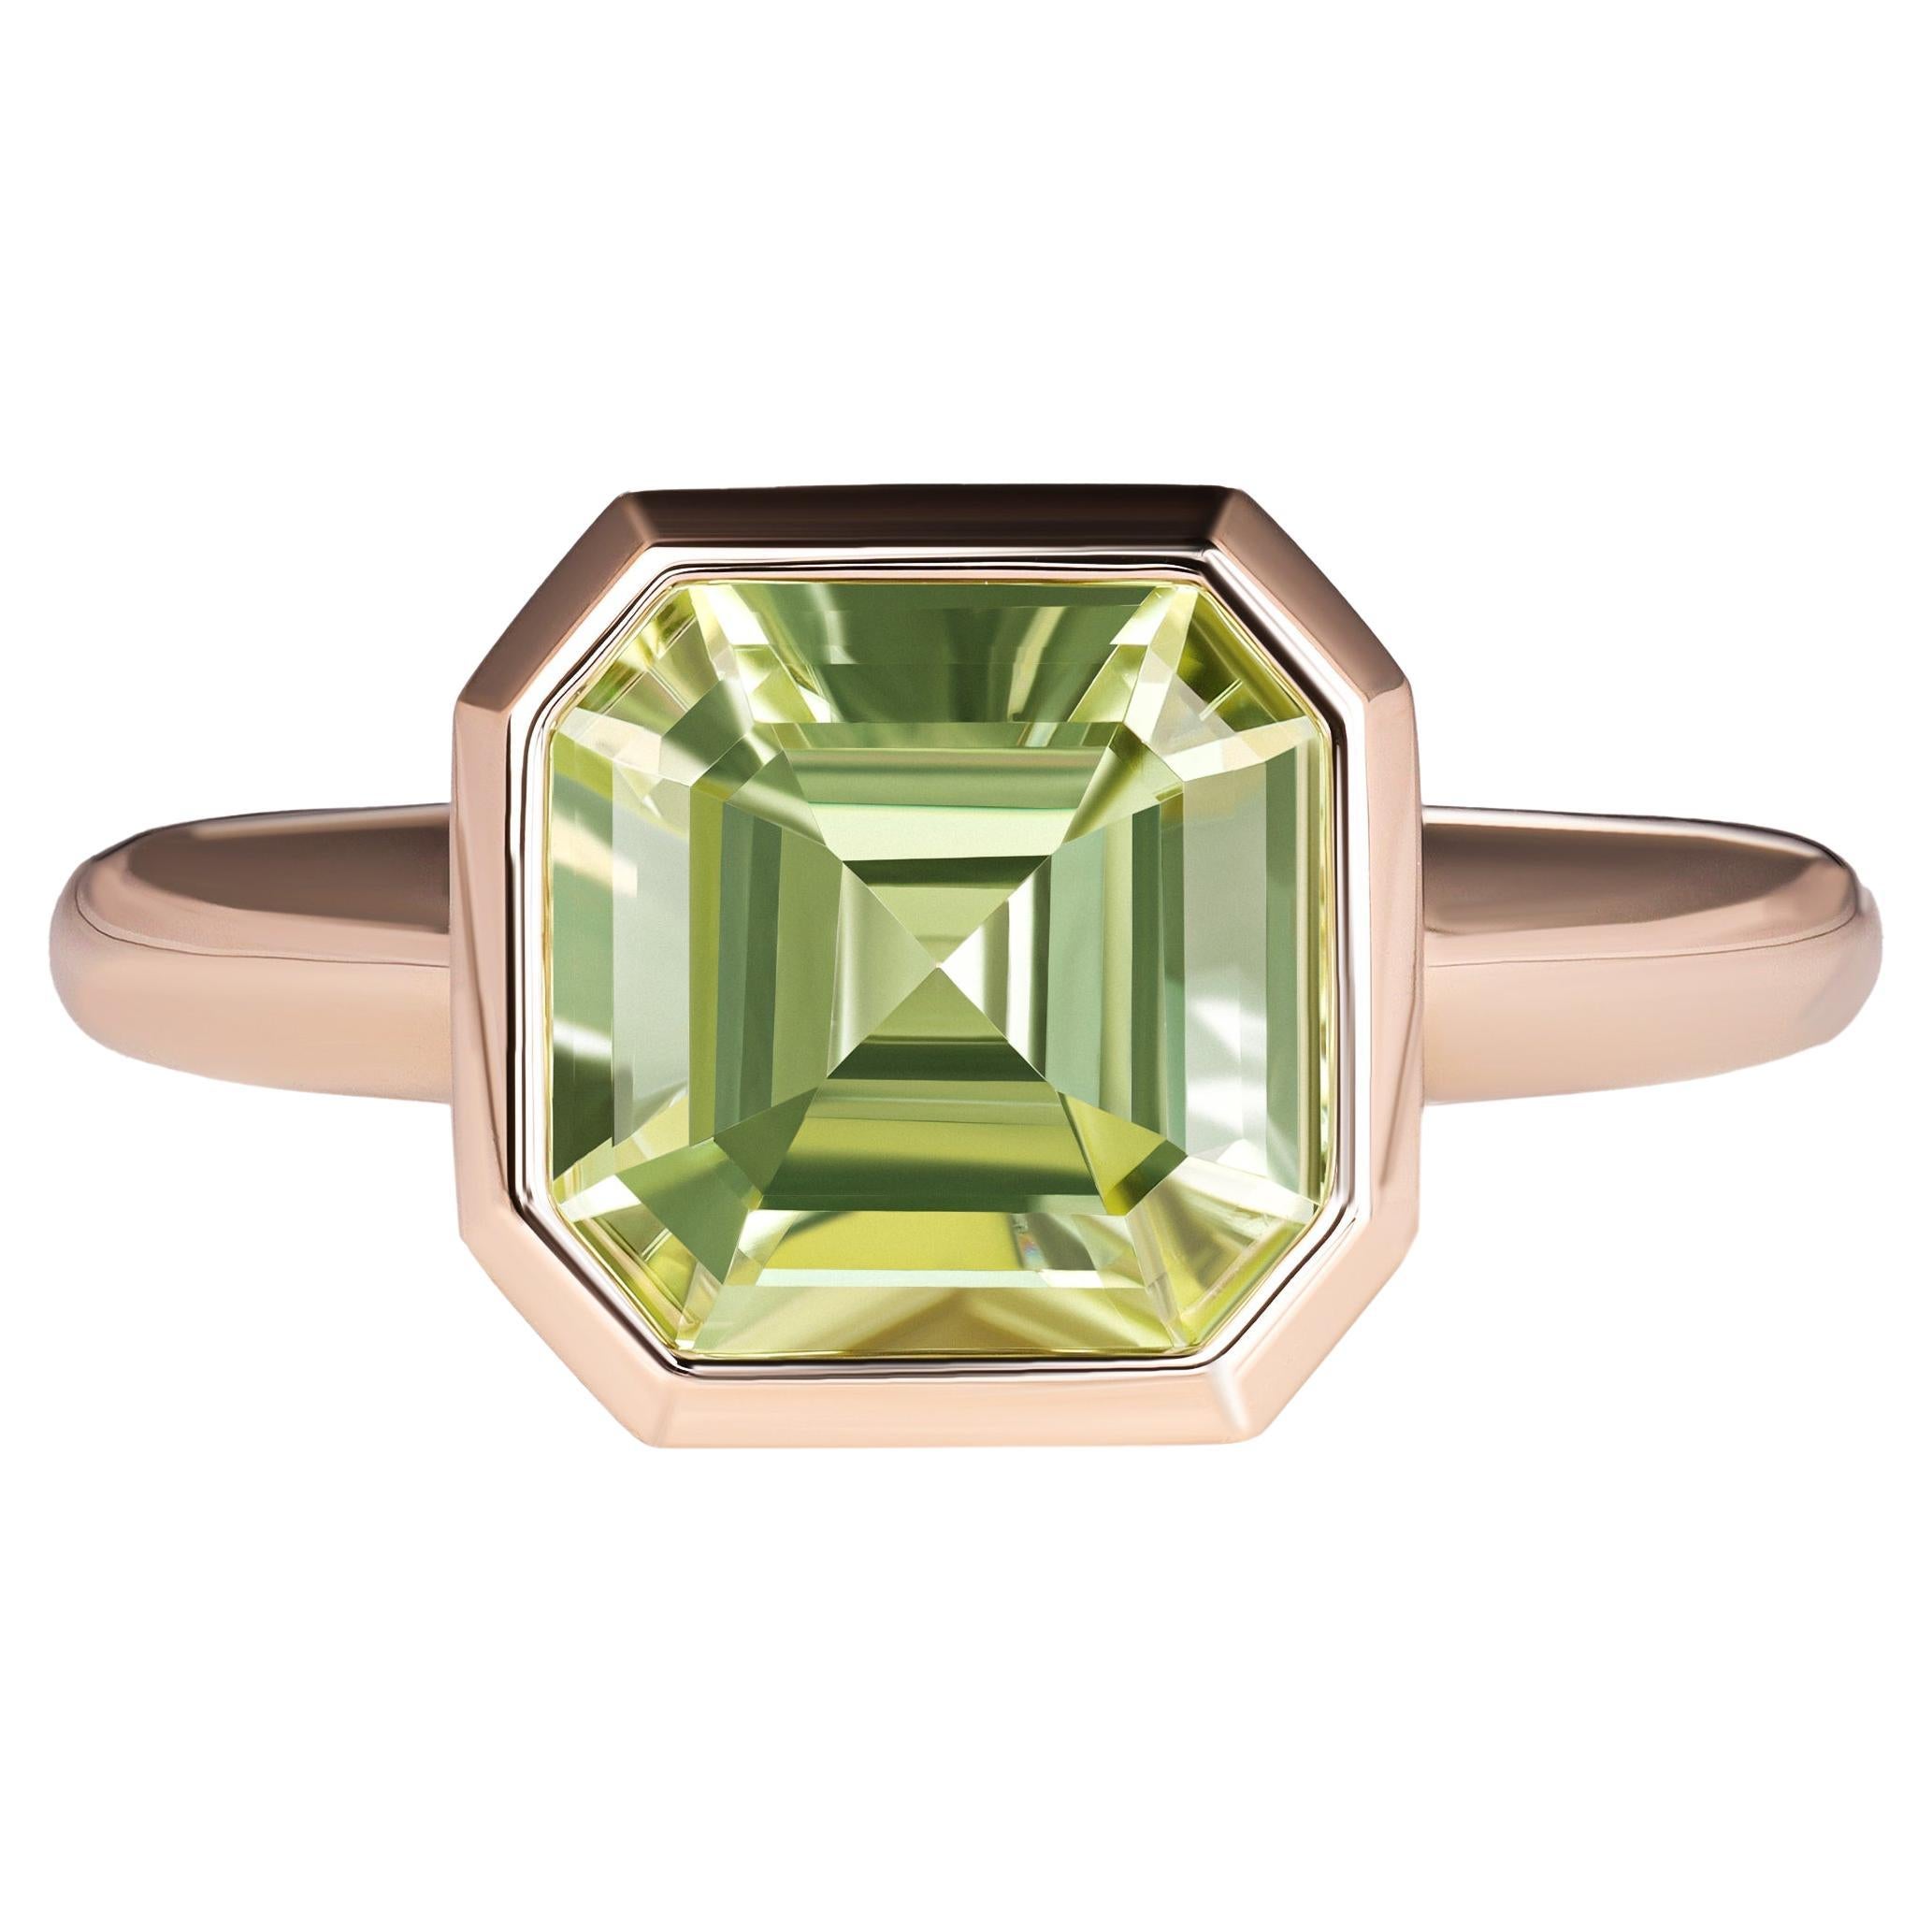  Mint Tourmaline 5.13 ct Ring in 18K Gold Champagne Color For Sale